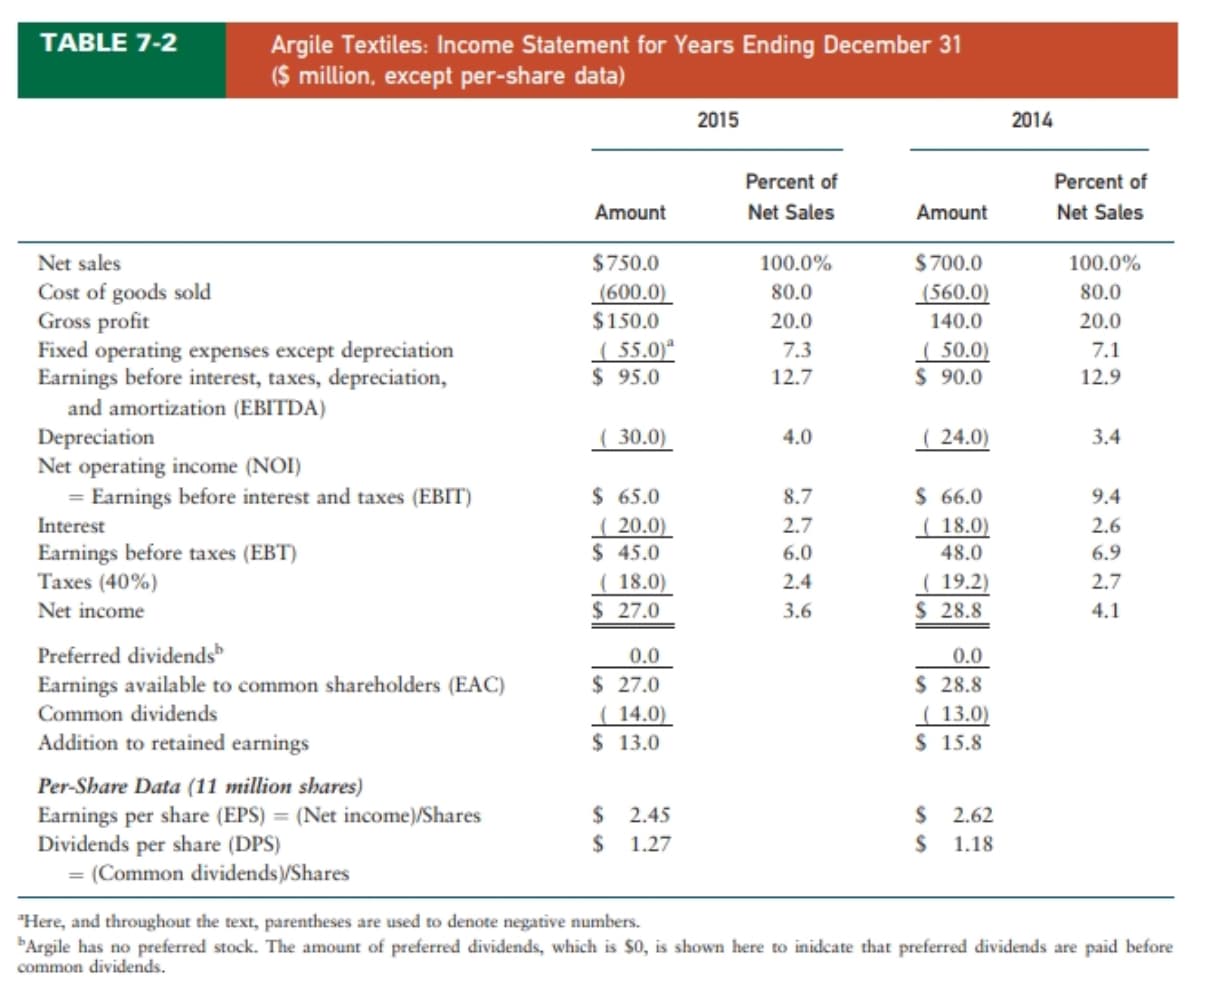 TABLE 7-2
Argile Textiles: Income Statement for Years Ending December 31
($ million, except per-share data)
2015
2014
Percent of
Percent of
Amount
Net Sales
Amount
Net Sales
Net sales
$750.0
100.0%
$700.0
100.0%
Cost of goods sold
Gross profit
Fixed operating expenses except depreciation
Earnings before interest, taxes, depreciation,
80.0
(560.0)
80.0
(600.0)
$150.0
20.0
140.0
20.0
( 55.0)ª
$ 95.0
( 50.0)
$ 90.0
7.3
7.1
12.7
12.9
and amortization (EBITDA)
( 24.0)
Depreciation
Net operating income (NOI)
= Earnings before interest and taxes (EBIT)
_( 30.0)
4.0
3.4
$ 65.0
( 20.0)
$ 45.0
( 18.0)
$ 27.0
8.7
$ 66.0
9.4
Interest
2.7
( 18.0)
2.6
Earnings before taxes (EBT)
Taxes (40%)
6.0
48.0
6.9
( 19.2)
$ 28.8
2.4
2.7
Net income
3.6
4.1
Preferred dividends
0.0
0.0
$ 27.0
( 14.0)
$ 13.0
Earnings available to common shareholders (EAC)
$ 28.8
( 13.0)
$ 15.8
Common dividends
Addition to retained earnings
Per-Share Data (11 million shares)
Earnings per share (EPS) = (Net income)/Shares
Dividends per share (DPS)
= (Common dividends)/Shares
$ 2.45
$ 2.62
1.27
1.18
"Here, and throughout the text, parentheses are used to denote negative numbers.
Argile has no preferred stock. The amount of preferred dividends, which is $0, is shown here to inidcate that preferred dividends are paid before
common dividends.
